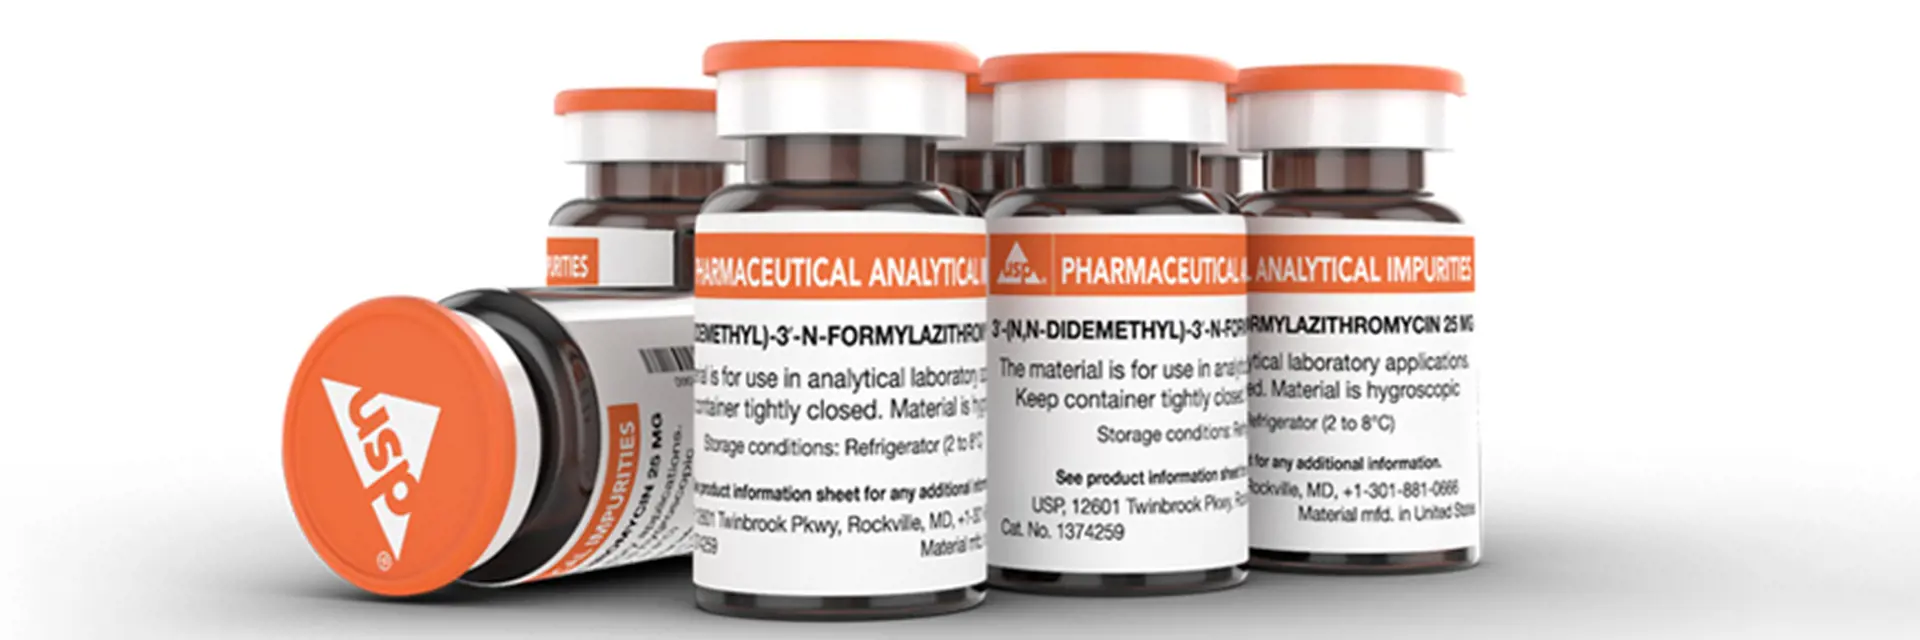 Vials containing products from the USP Pharmaceutical Analytical Impurity range